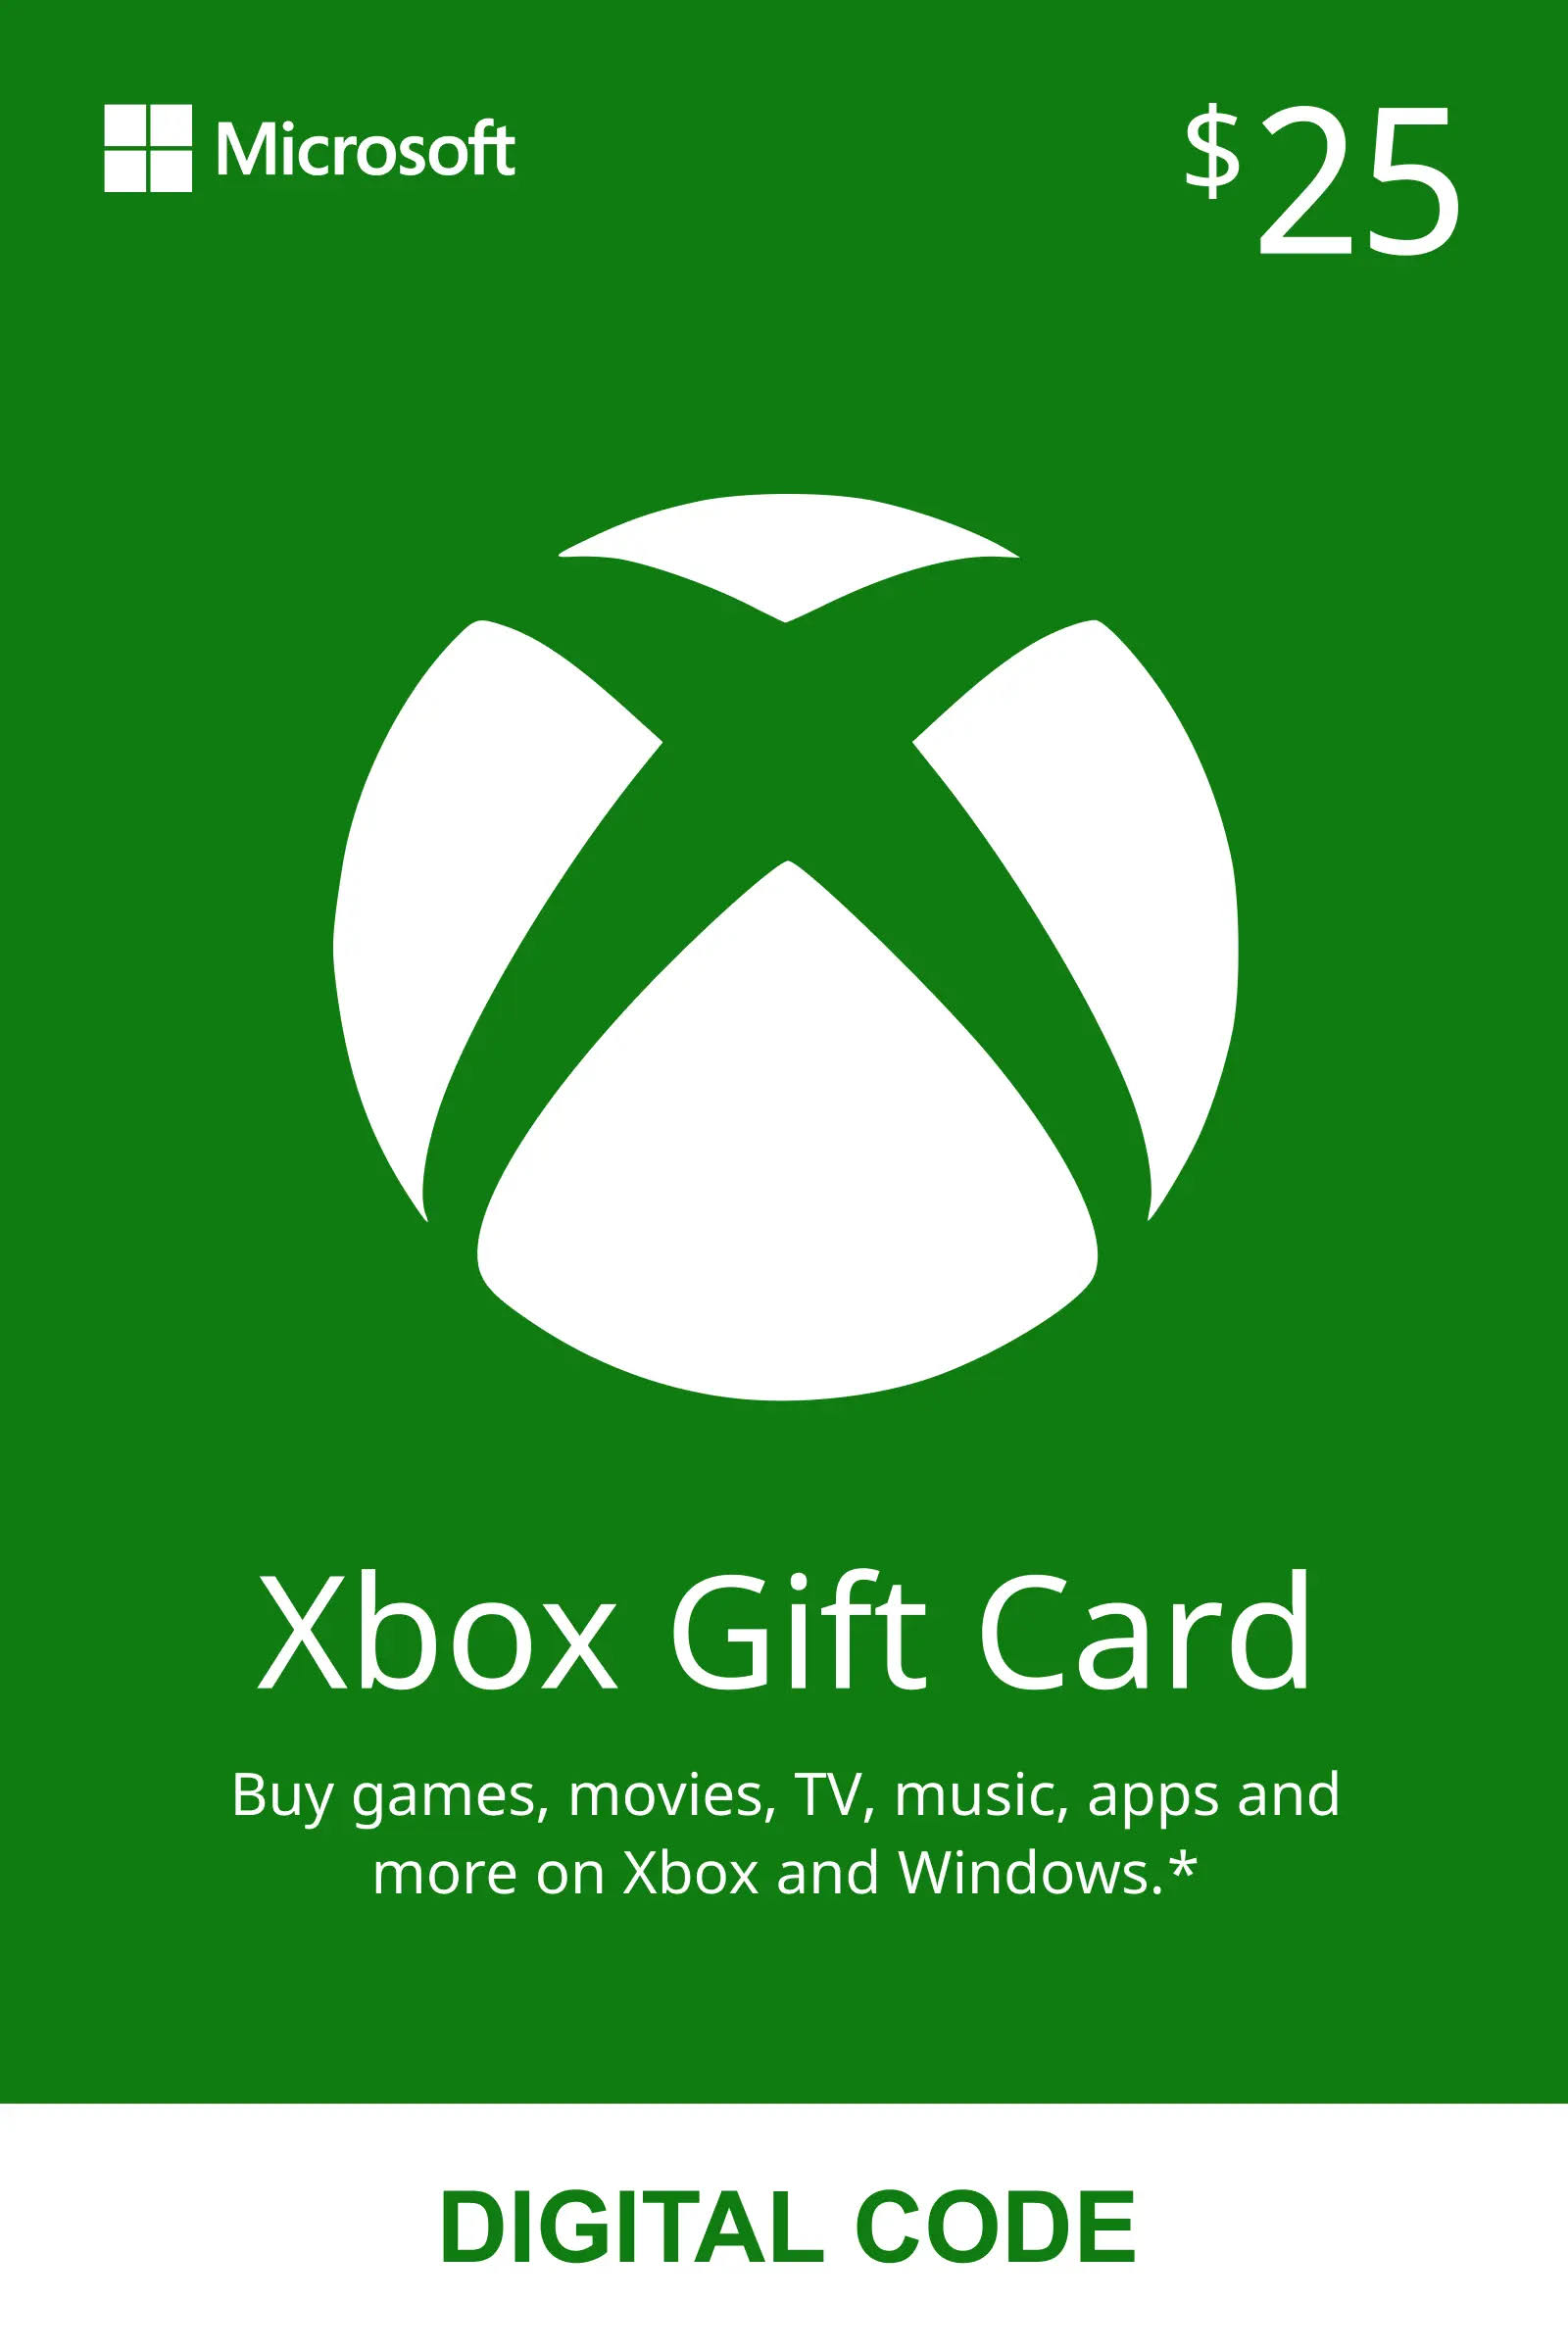 Xbox Live Gift Card 50 Usd Wallet